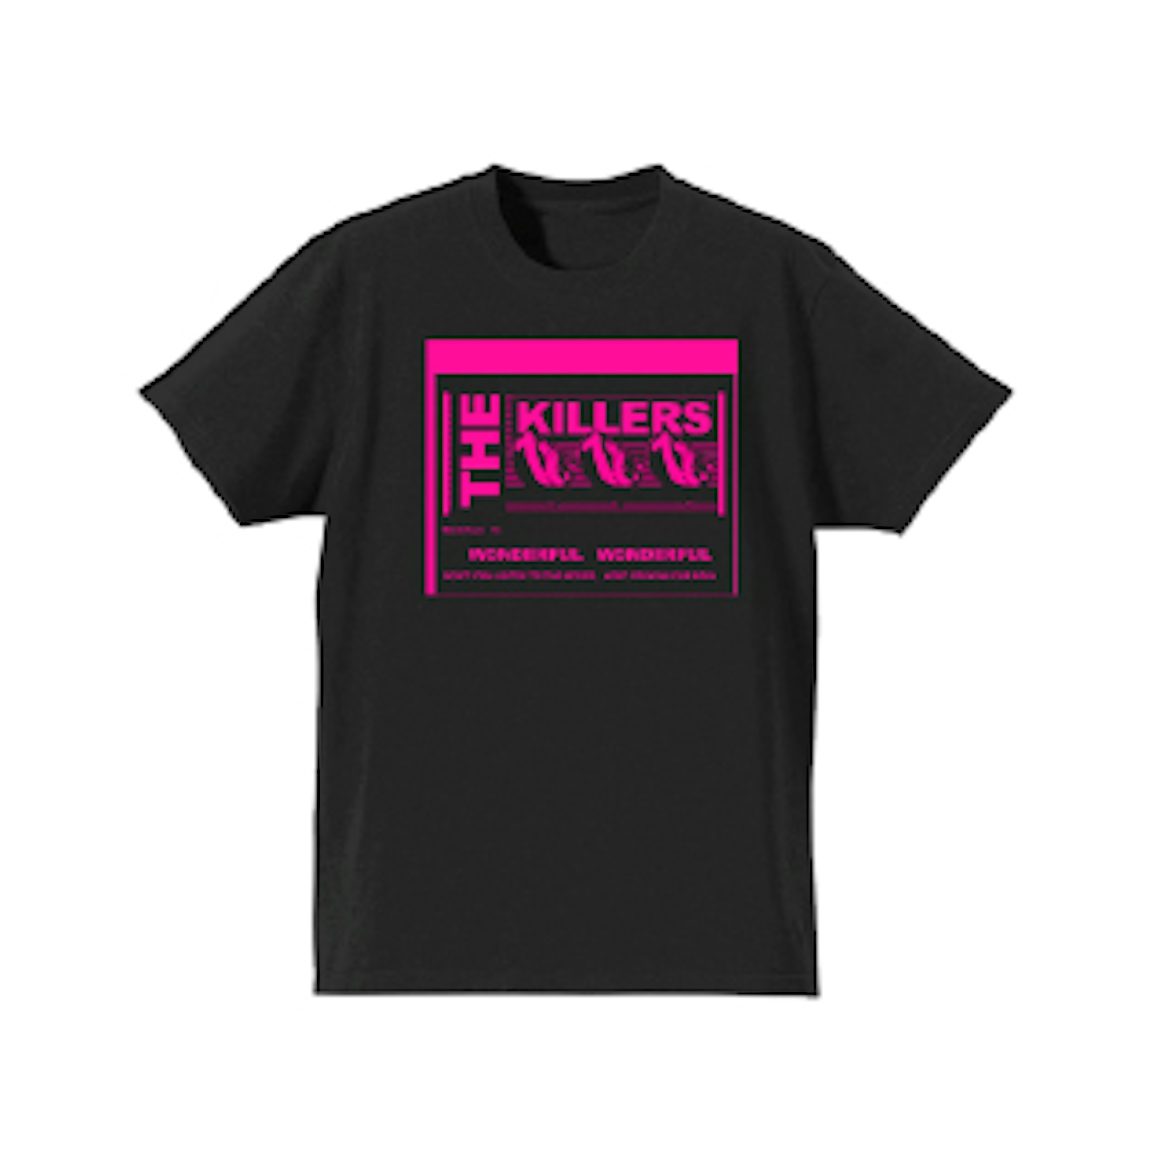 The Killers Store: Official Merch & Vinyl